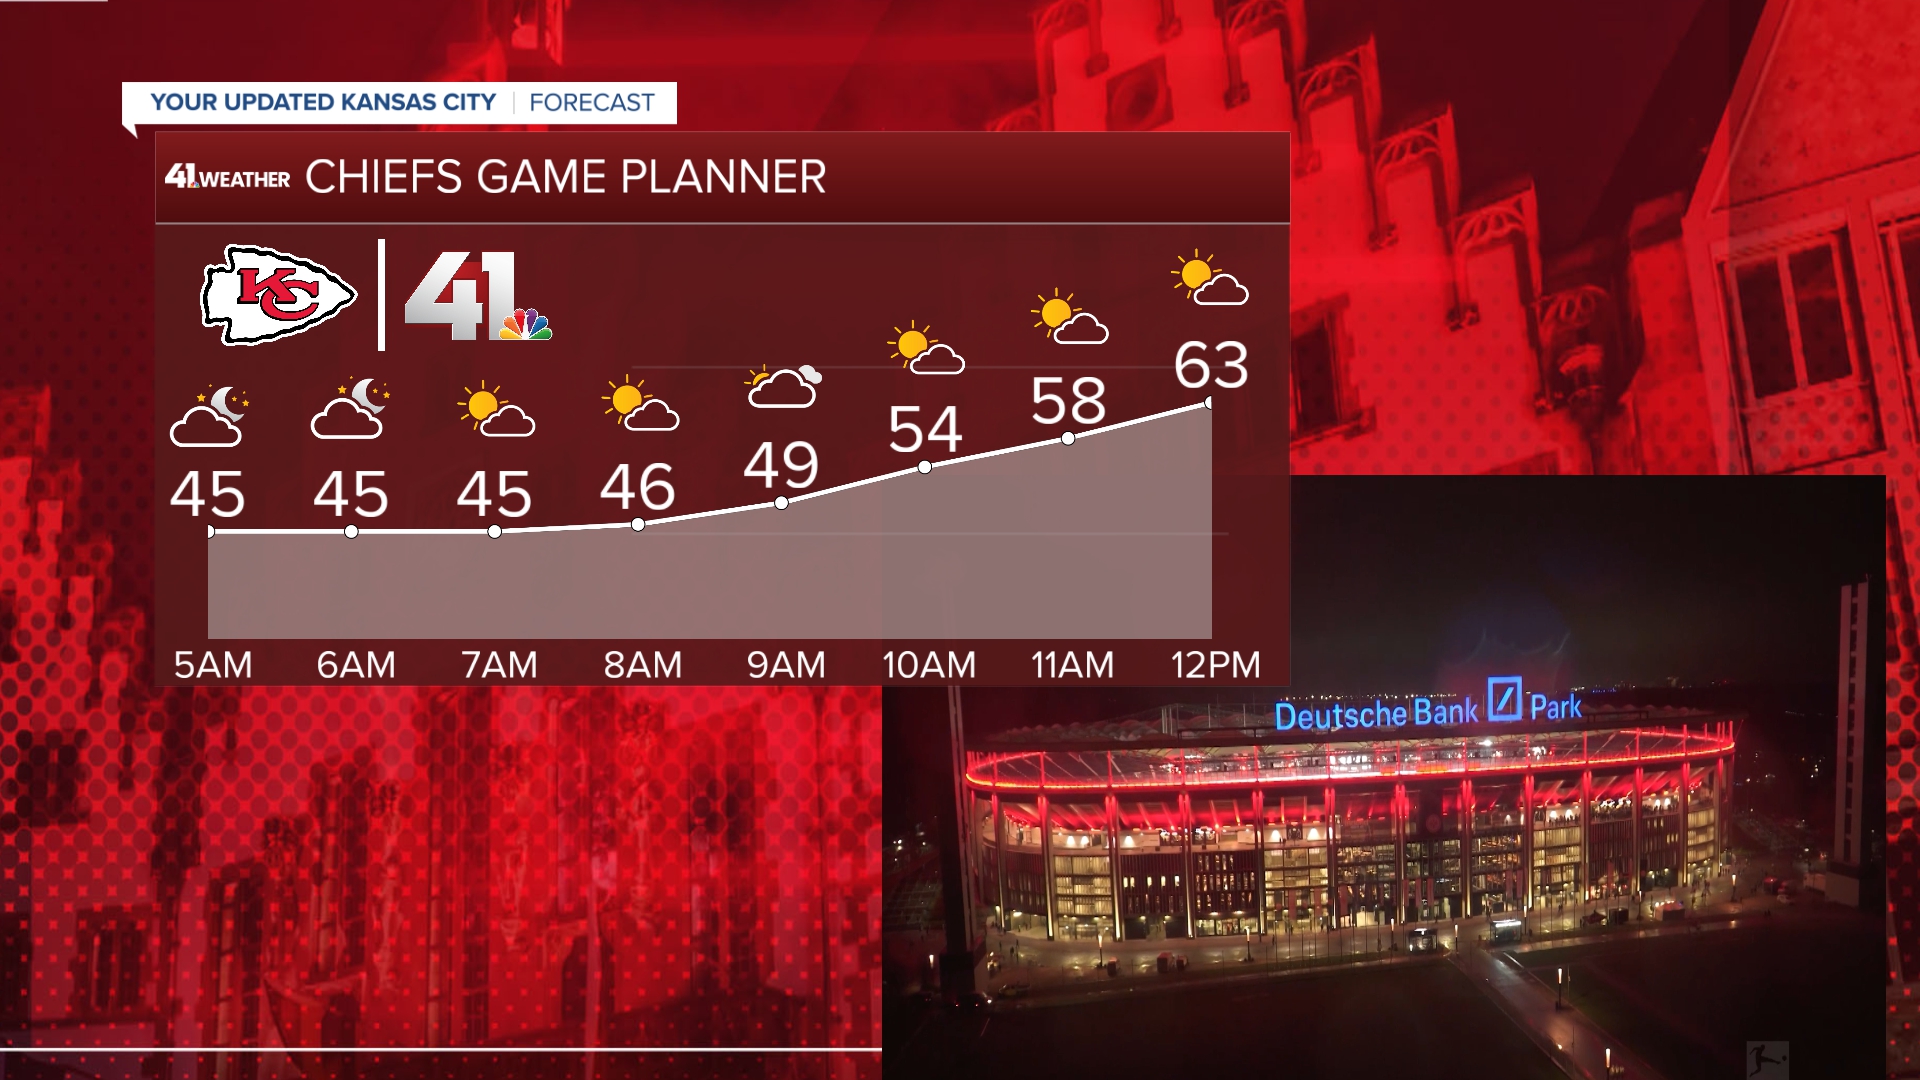 KSHB 41's Mike Nicco says Chiefs parade forecast looks good